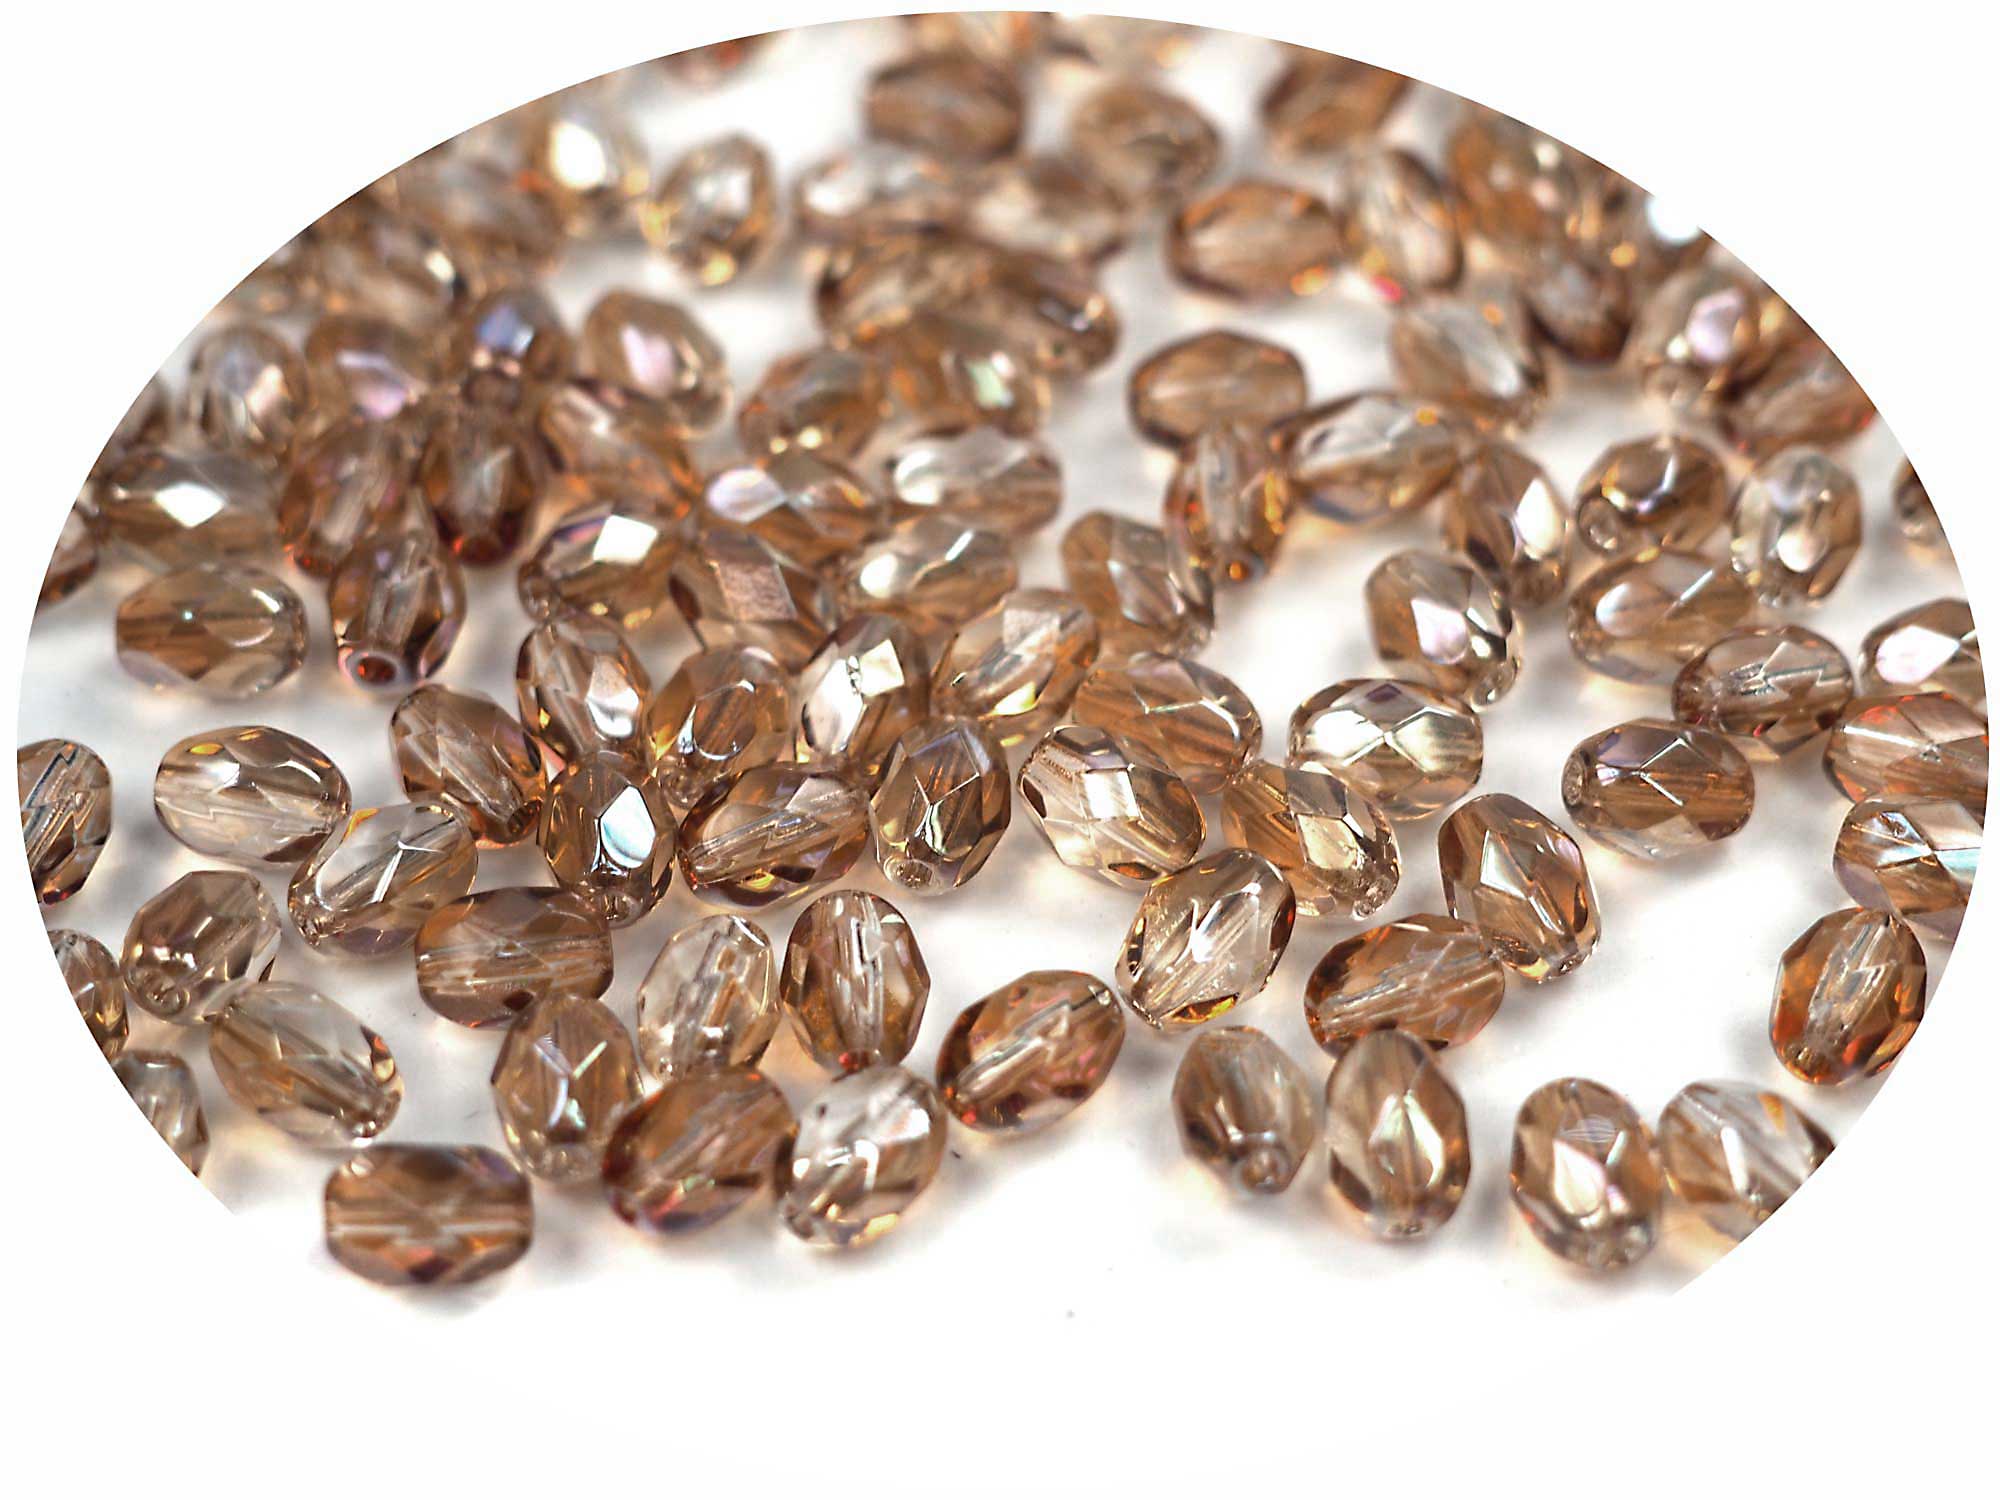 Czech Glass Olive Shaped Faceted Fire Polished Beads 6x4mm Crystal Celsian coated, 80 pieces, P860